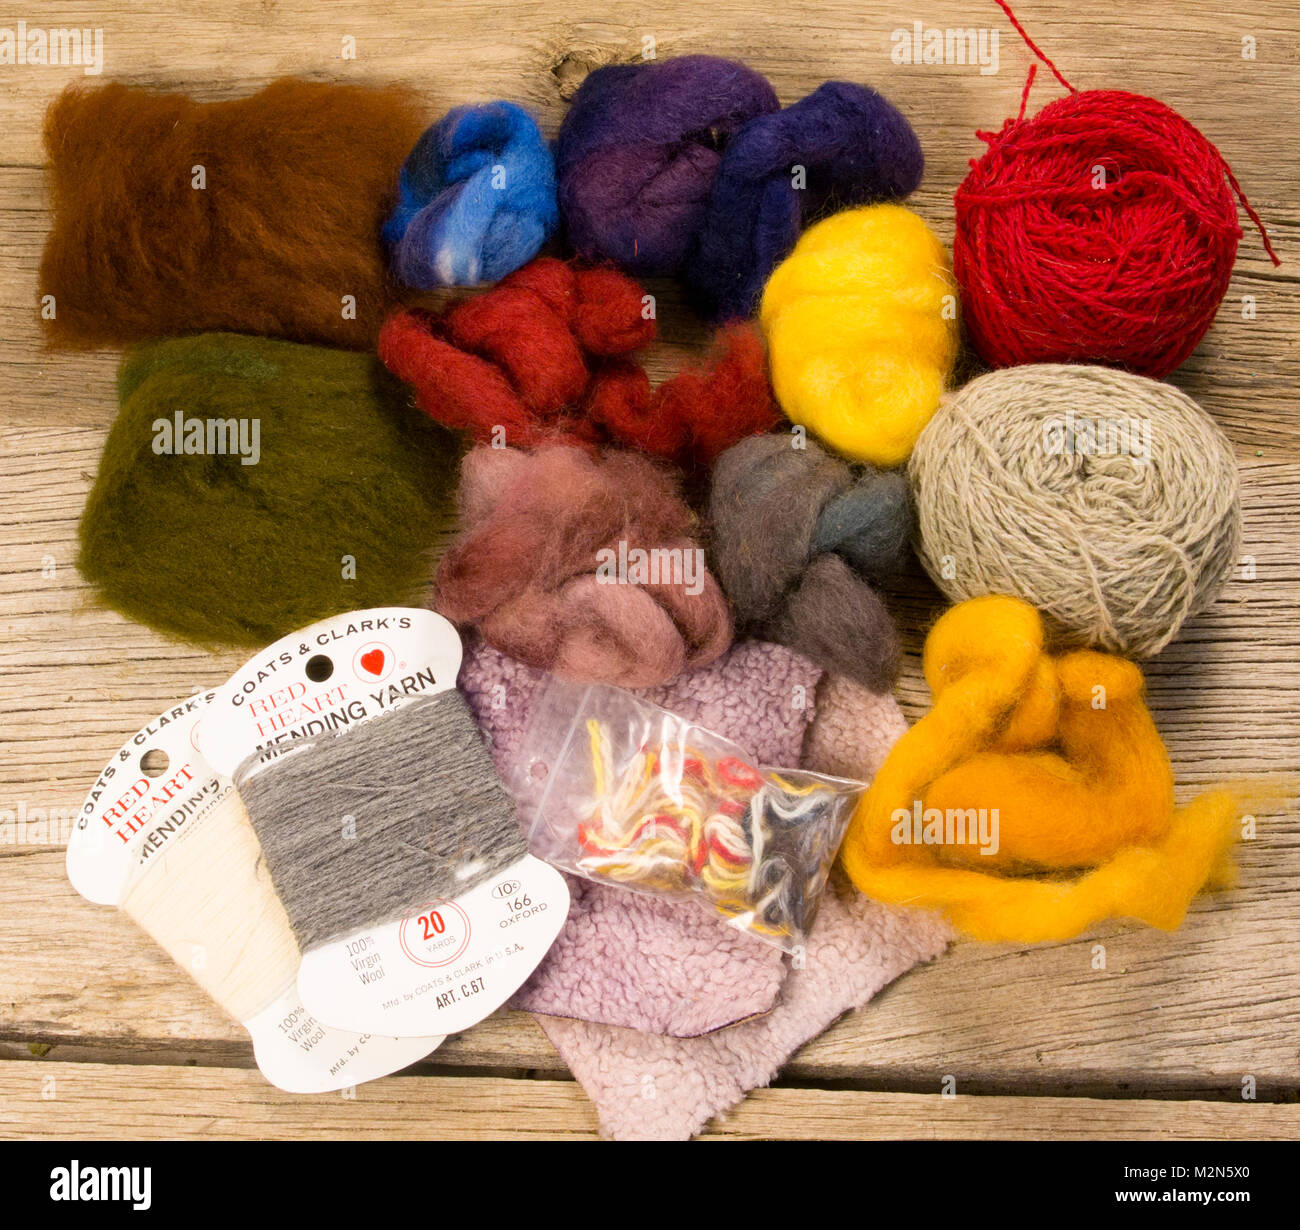 Sheep and Lambs Wool Wool from sheep and lambs can be dyed in any number of colors. It readily absorbs water and makes a great dubbing. Stock Photo